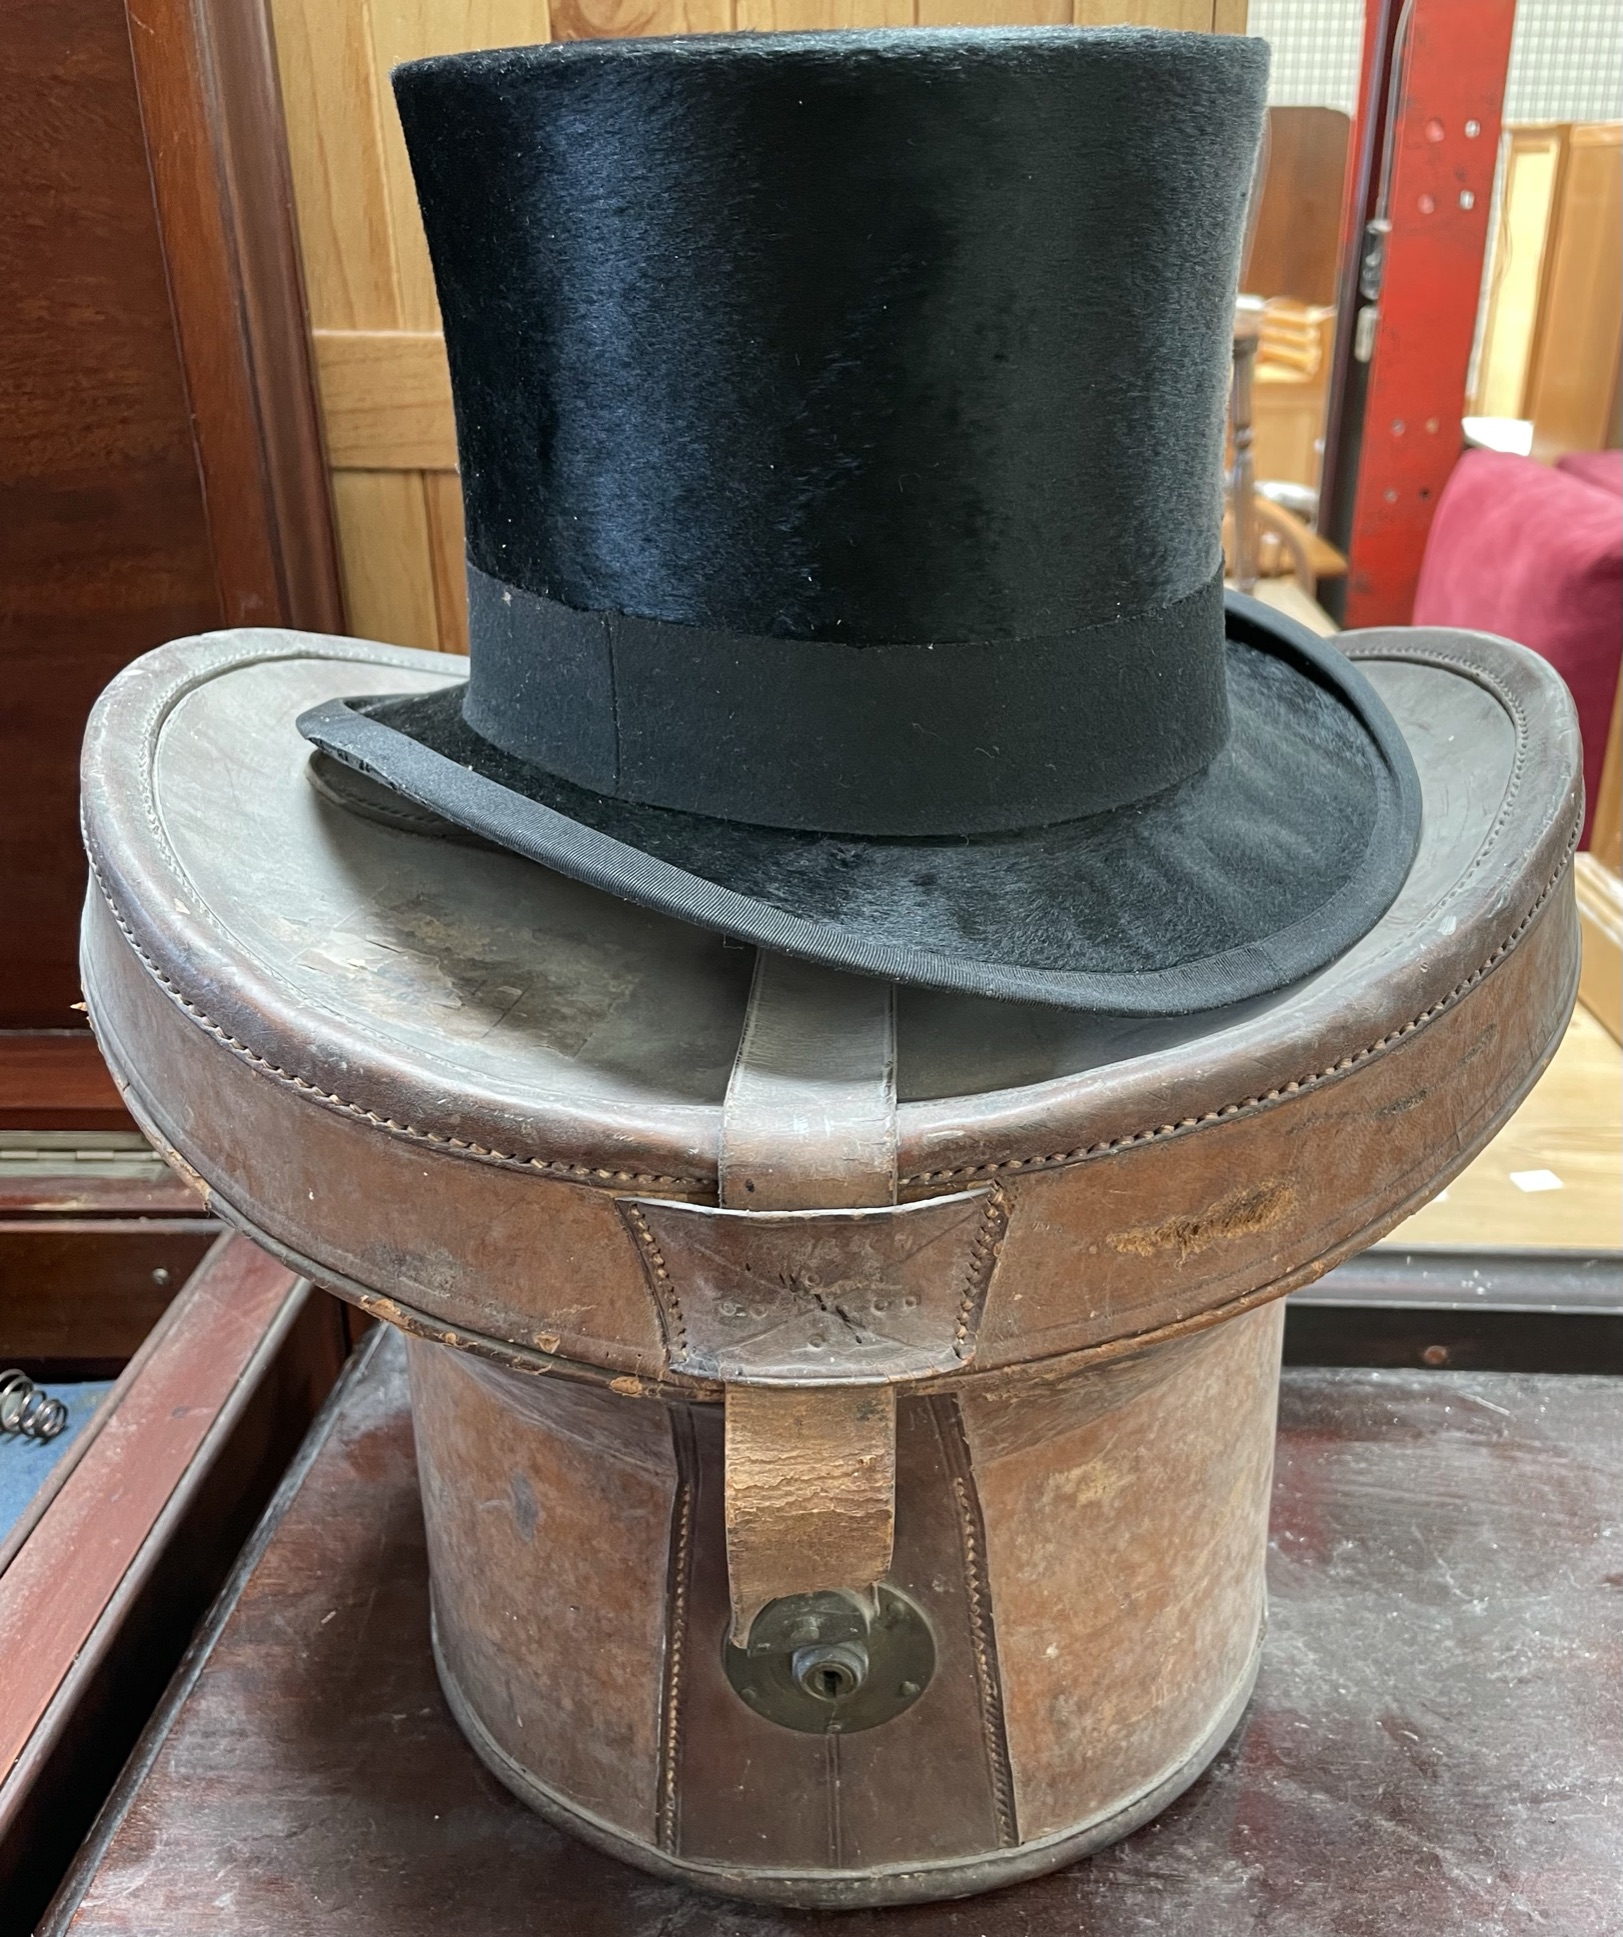 A Christy's London top hat in a leather case.